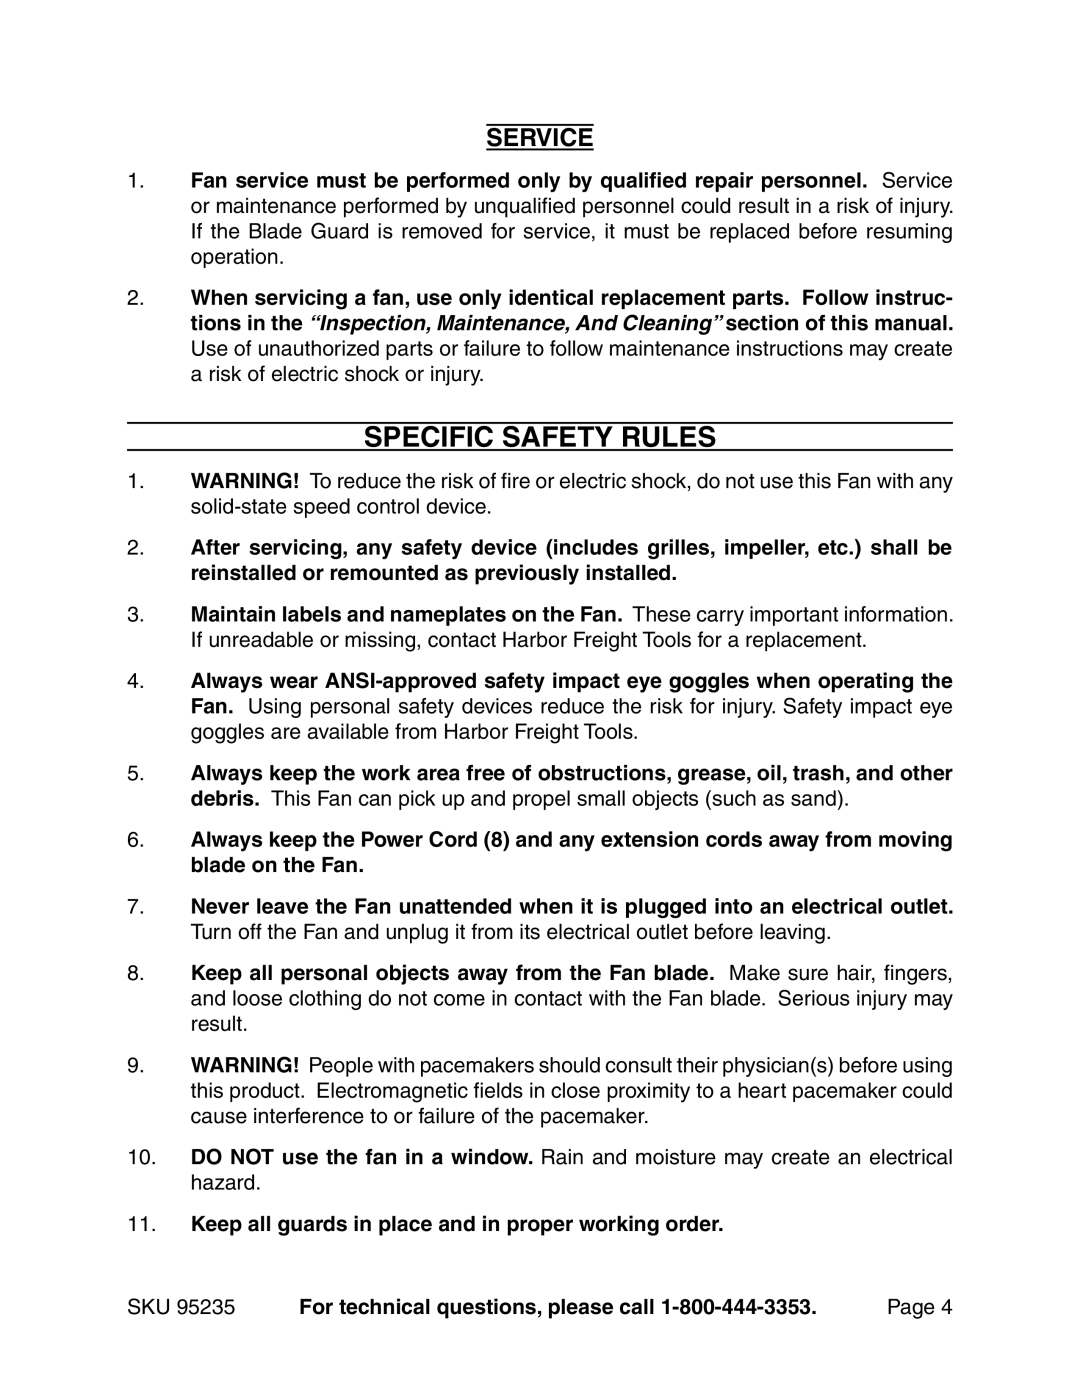 Chicago Electric 95235 manual Specific Safety Rules, Service 